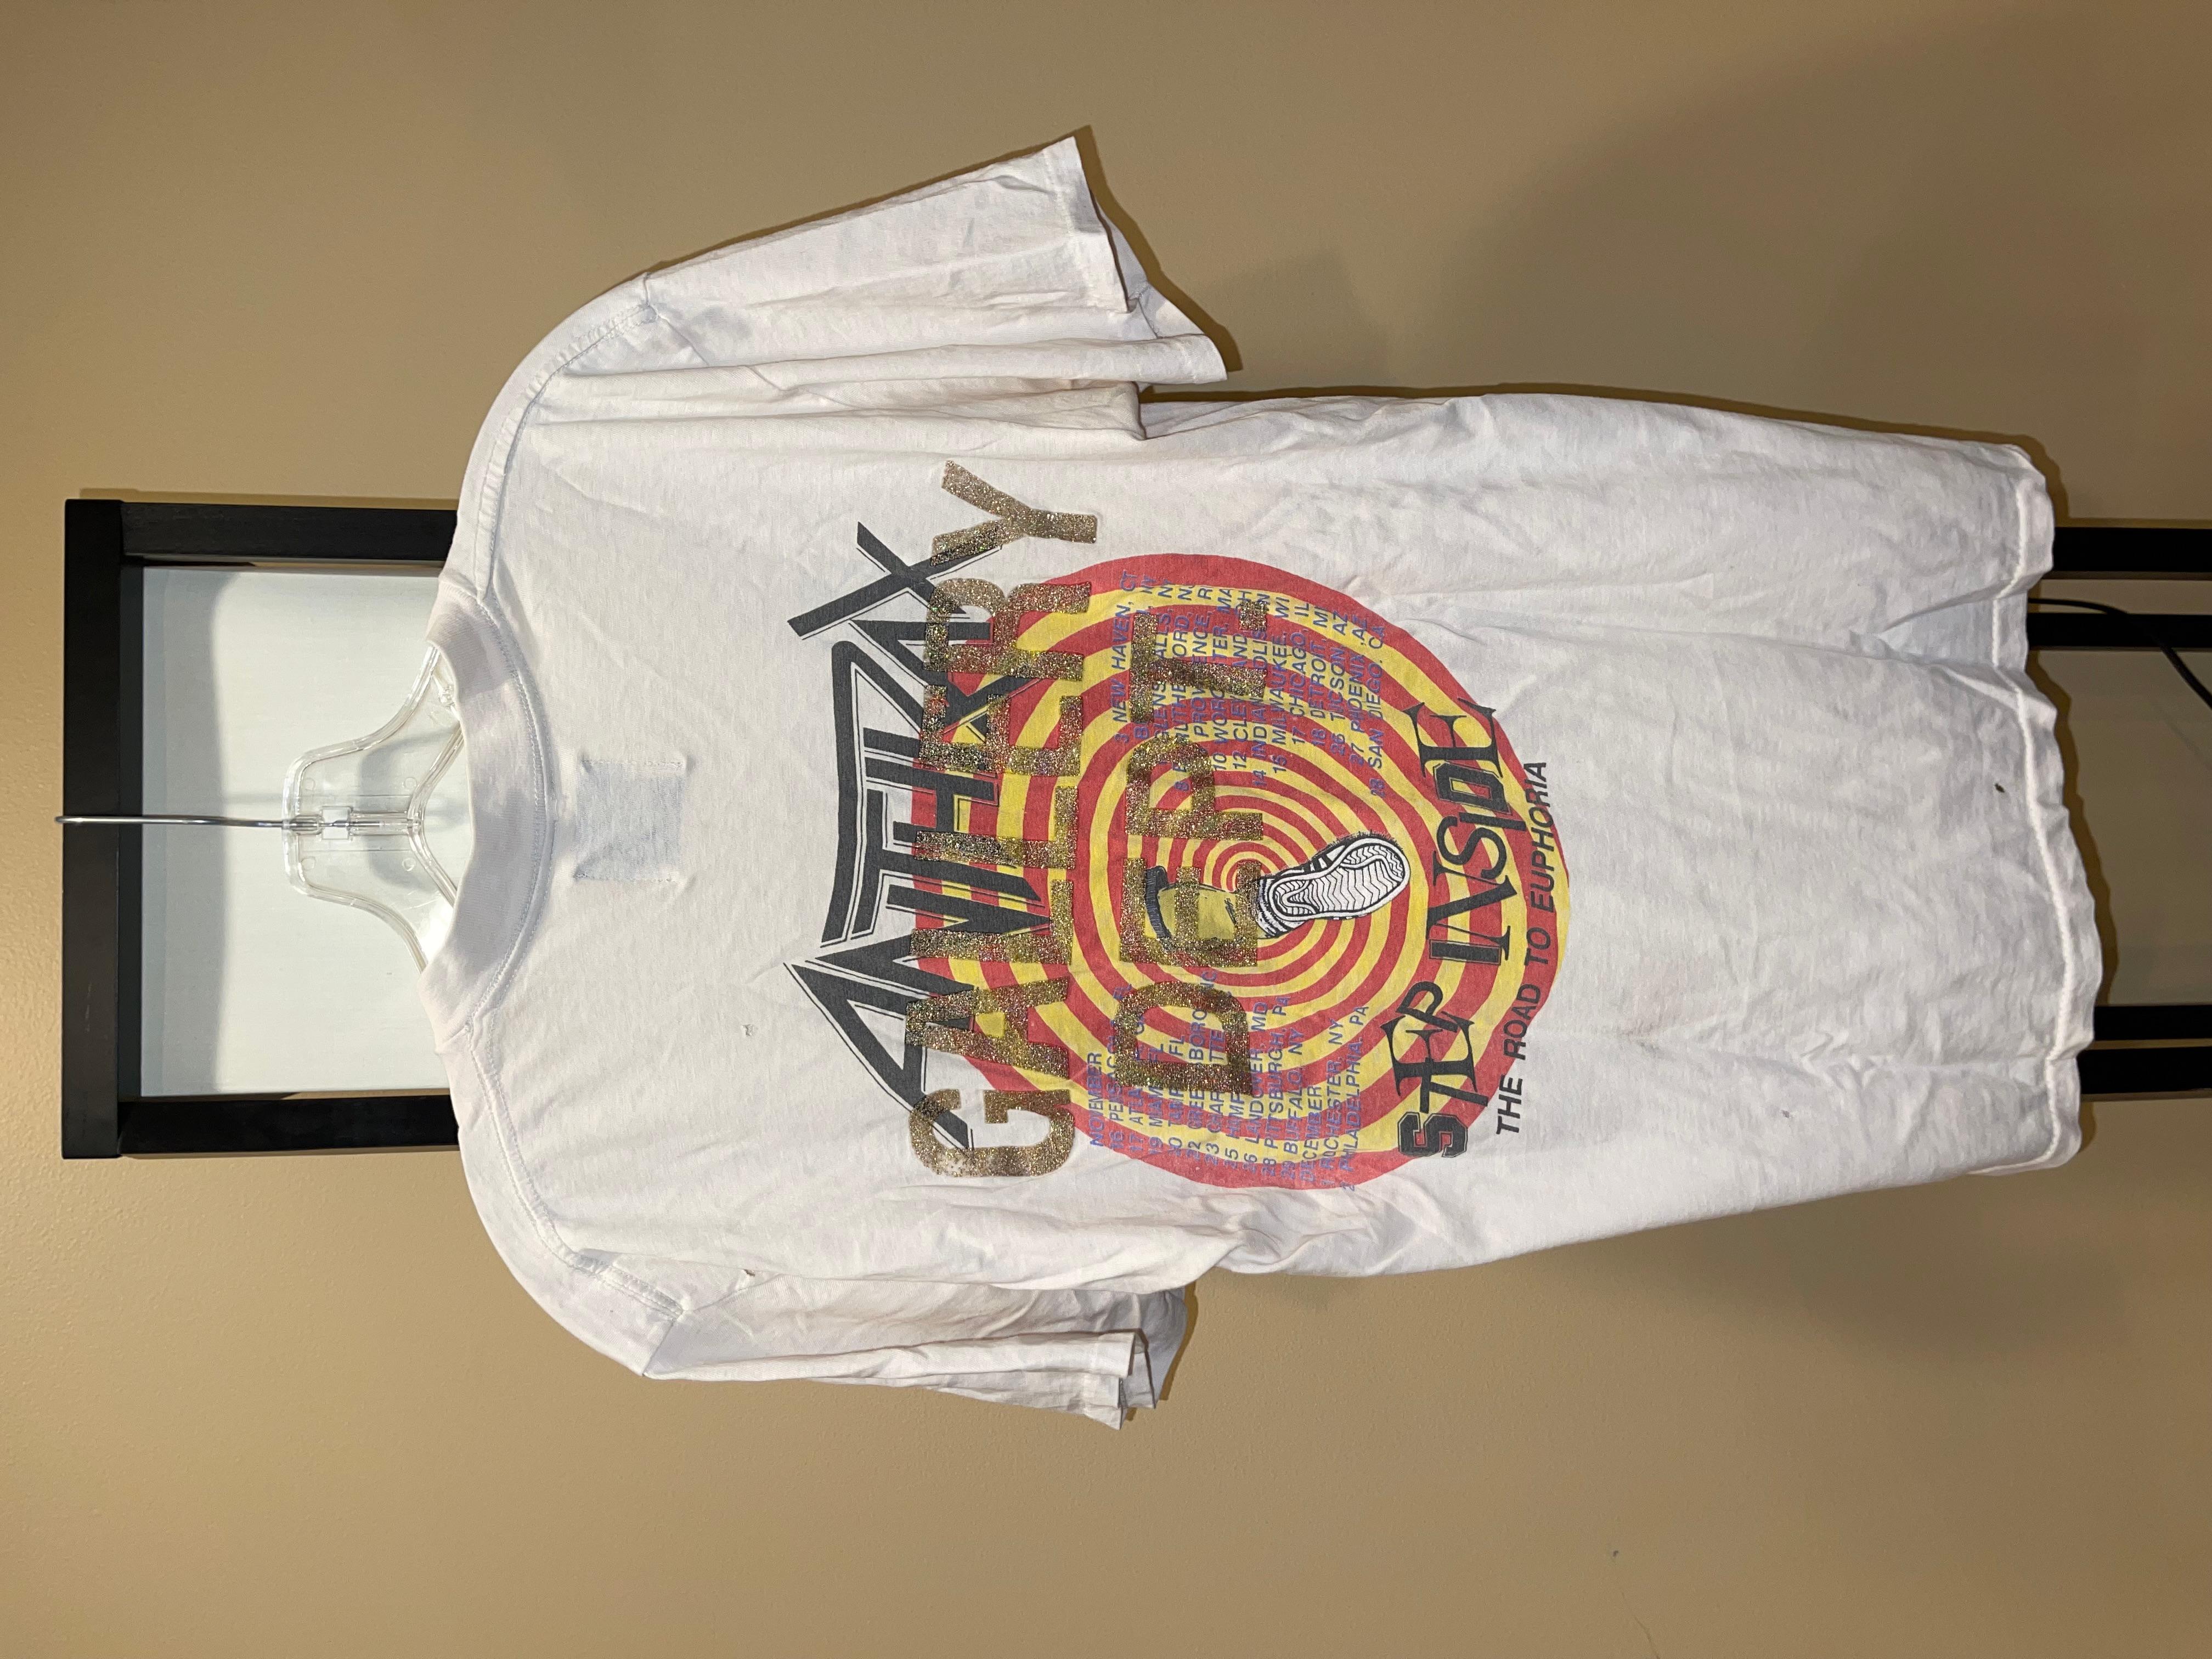 Gallery Dept. Vintage ANTHRAX Band Tee
Tag says Large but fits Small-Medium (see measurements)
Vintage Anthrax tee from 80s
Amazing vintage condition (see all pics)

EXTREMELY RARE and LIMITED Gallery Dept Vintage Tee. This tee is a 1 of 1 from